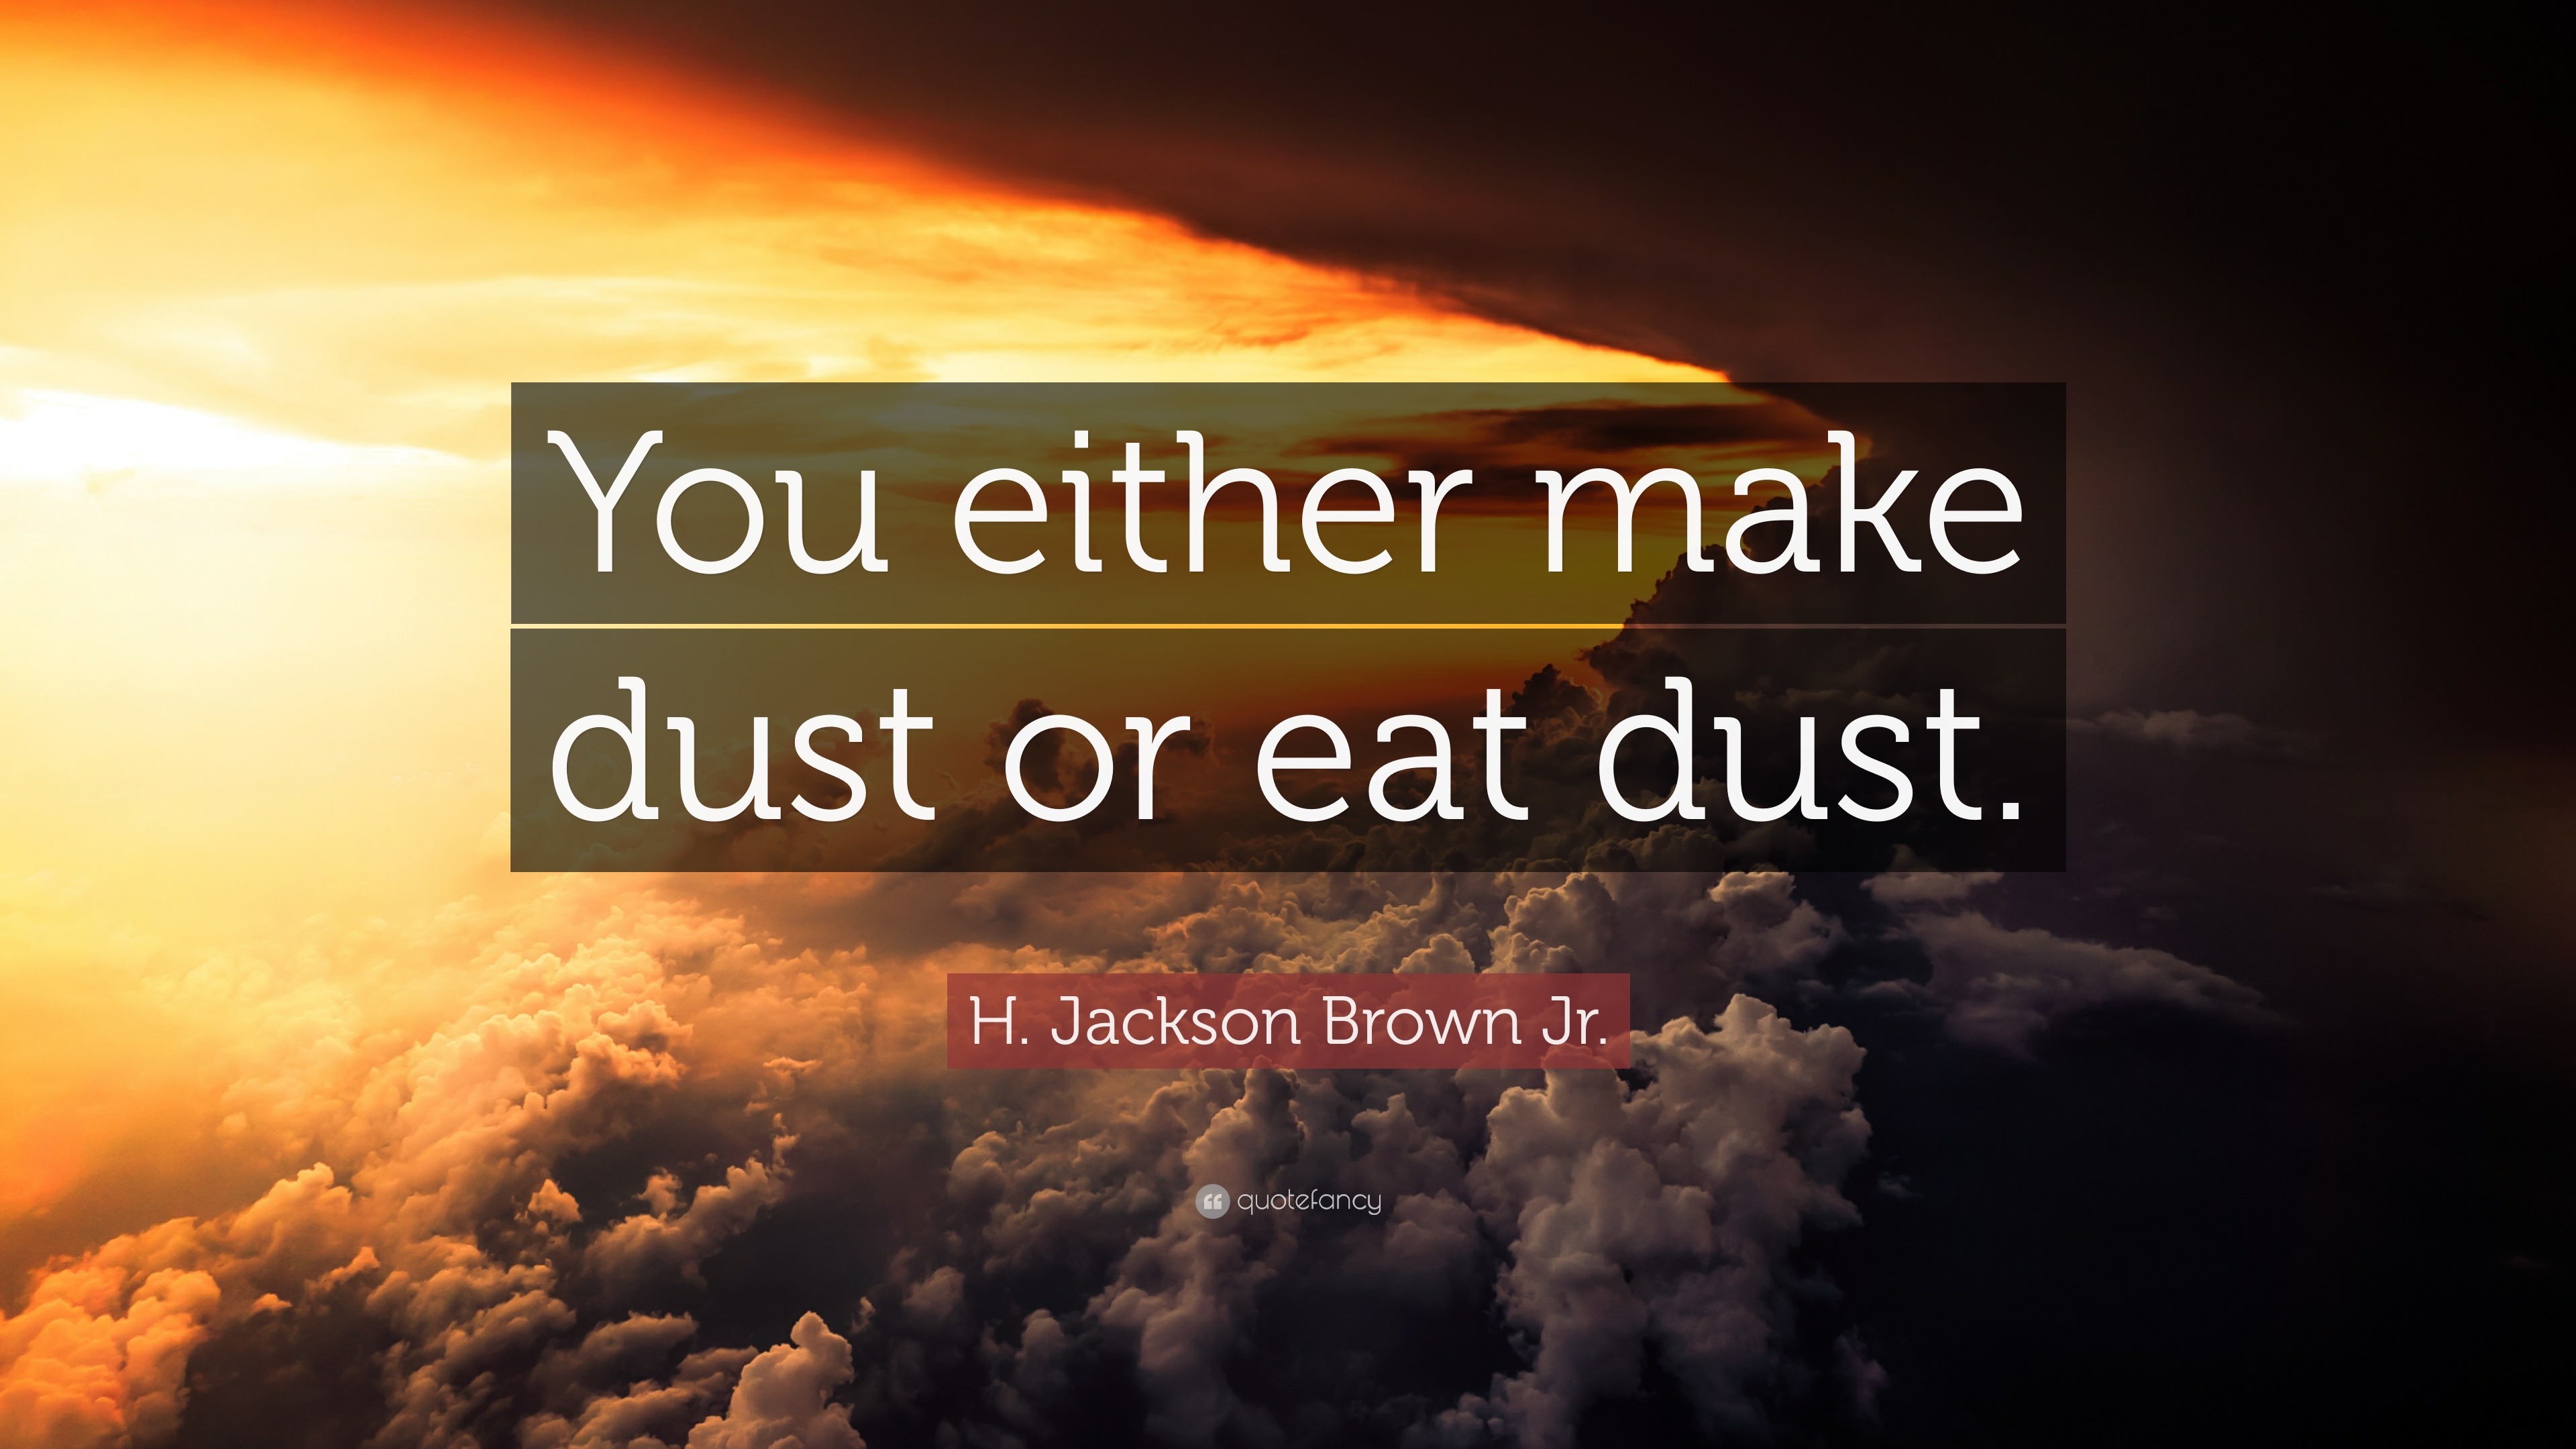 H. Jackson Brown Jr. Quote: “You either make dust or eat dust.”